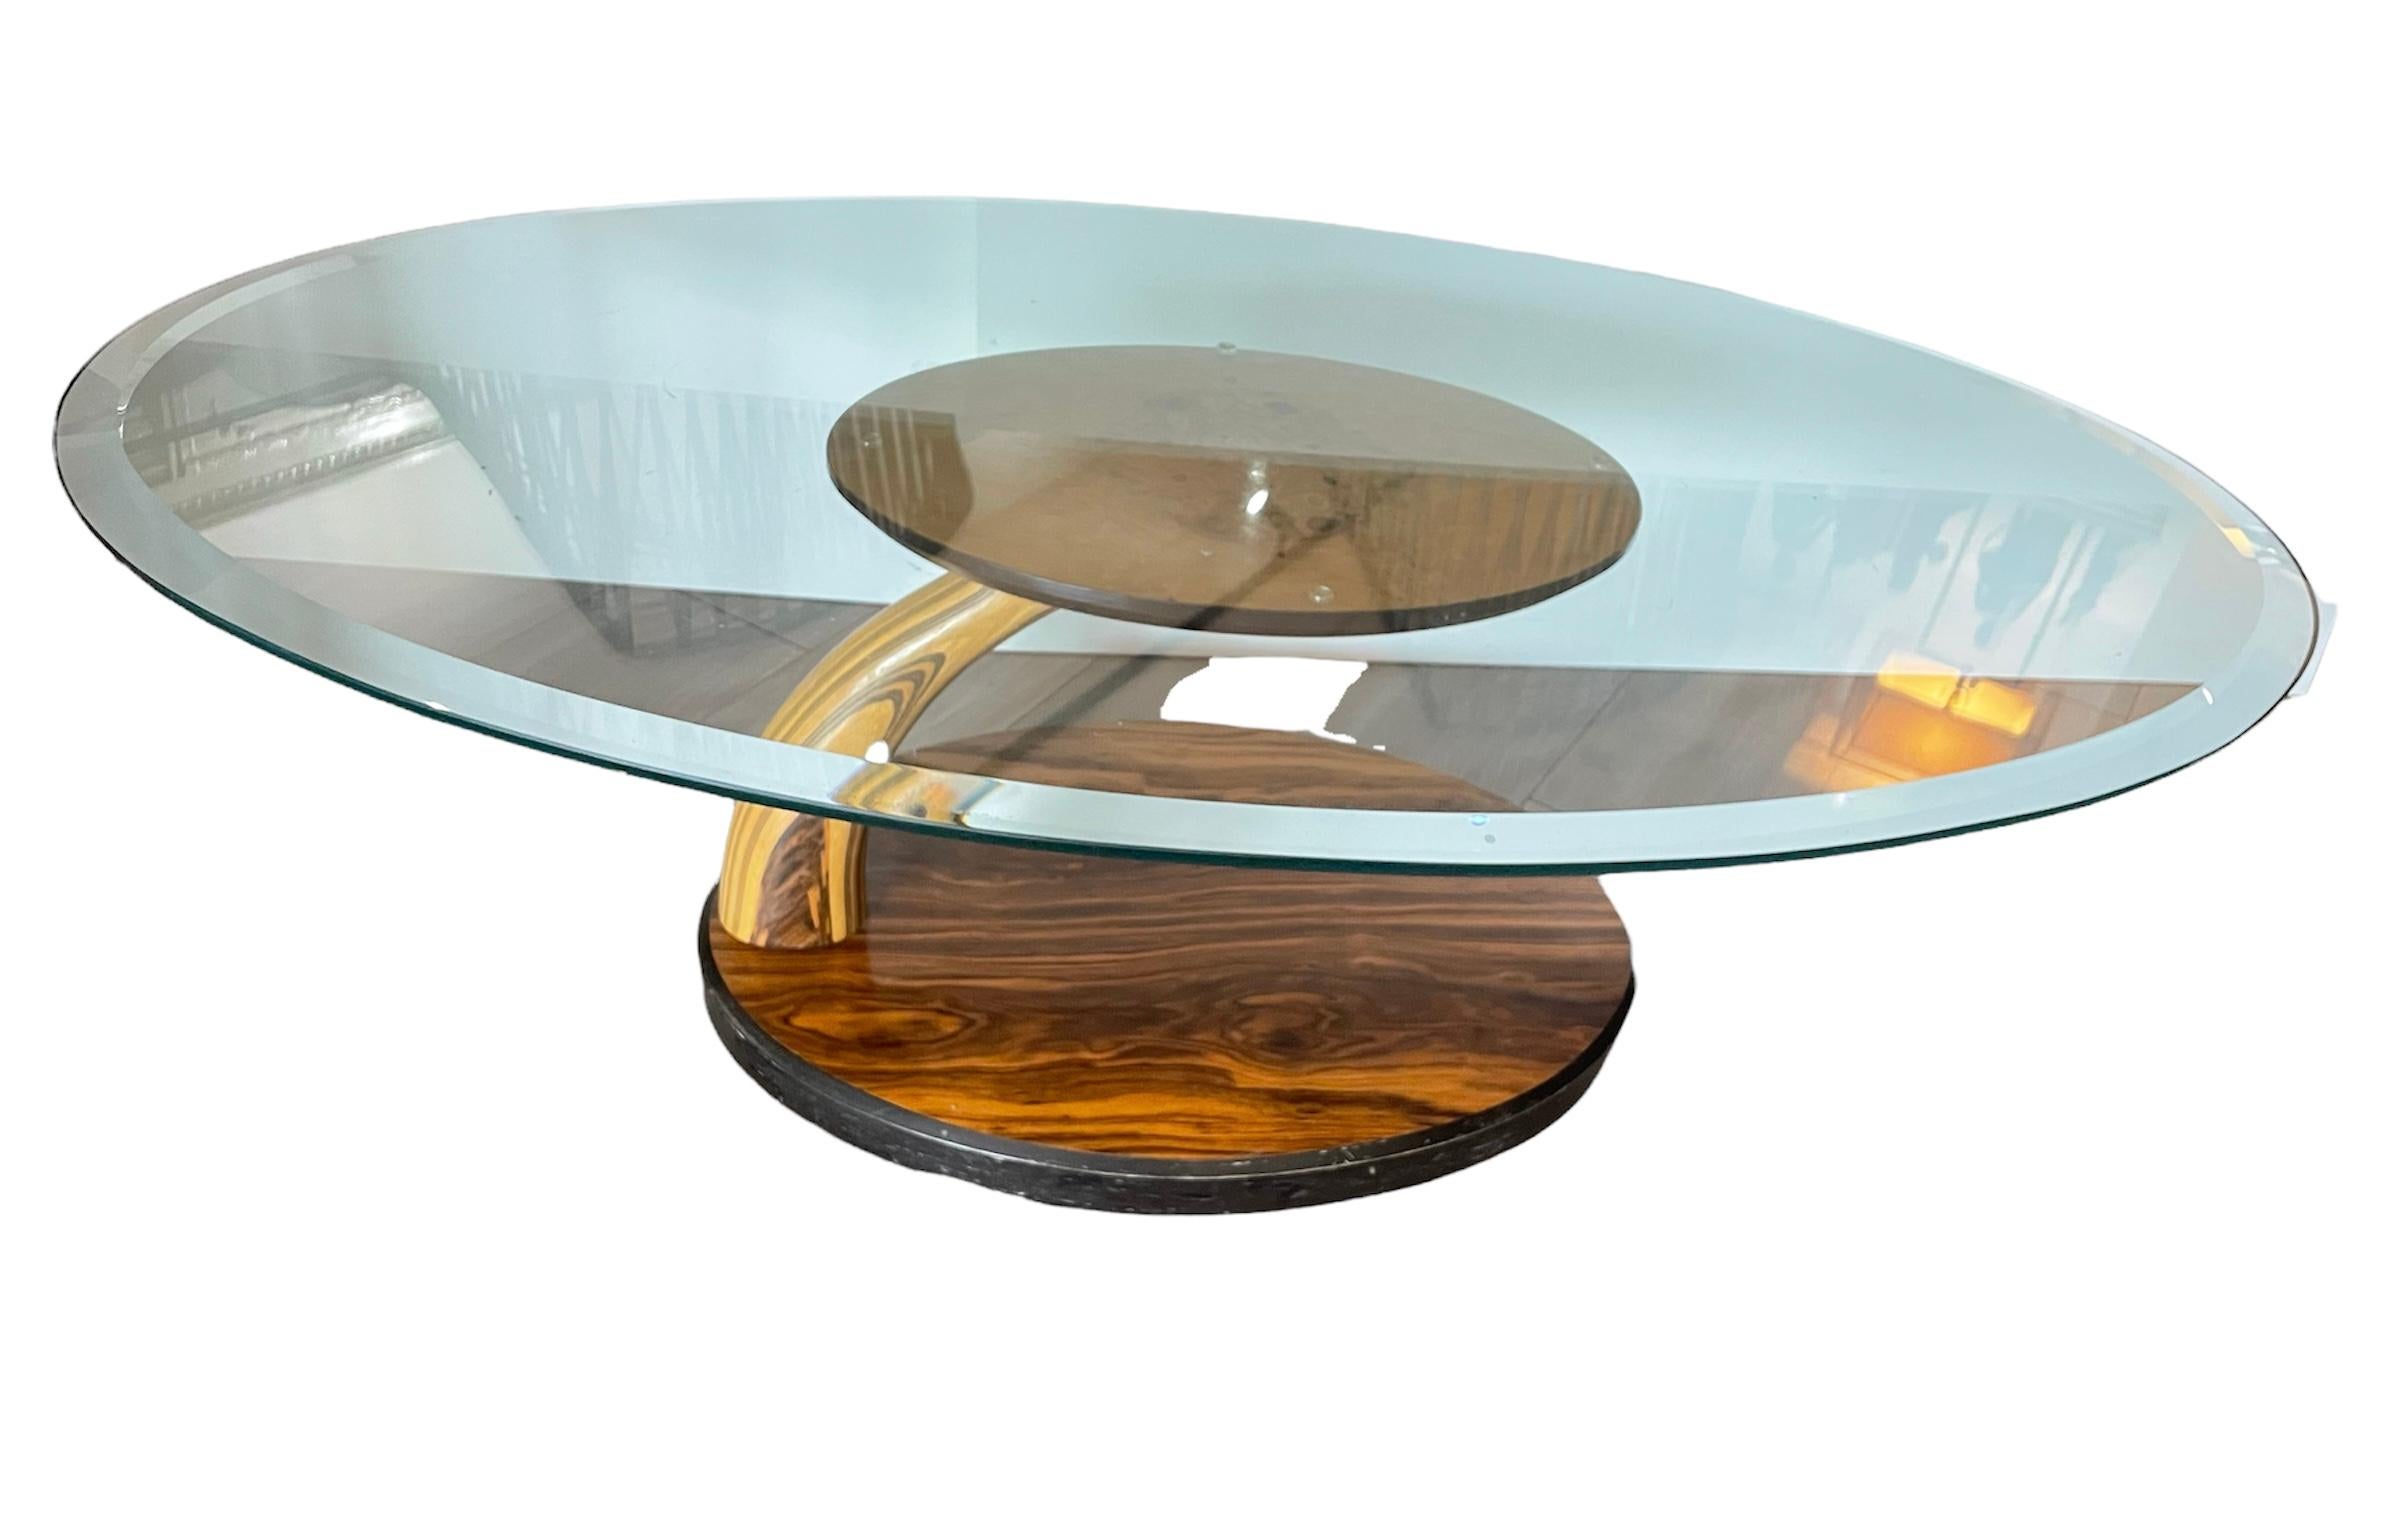 Carved Henredon Zebra Wood Coffee Table with Suspended Glass